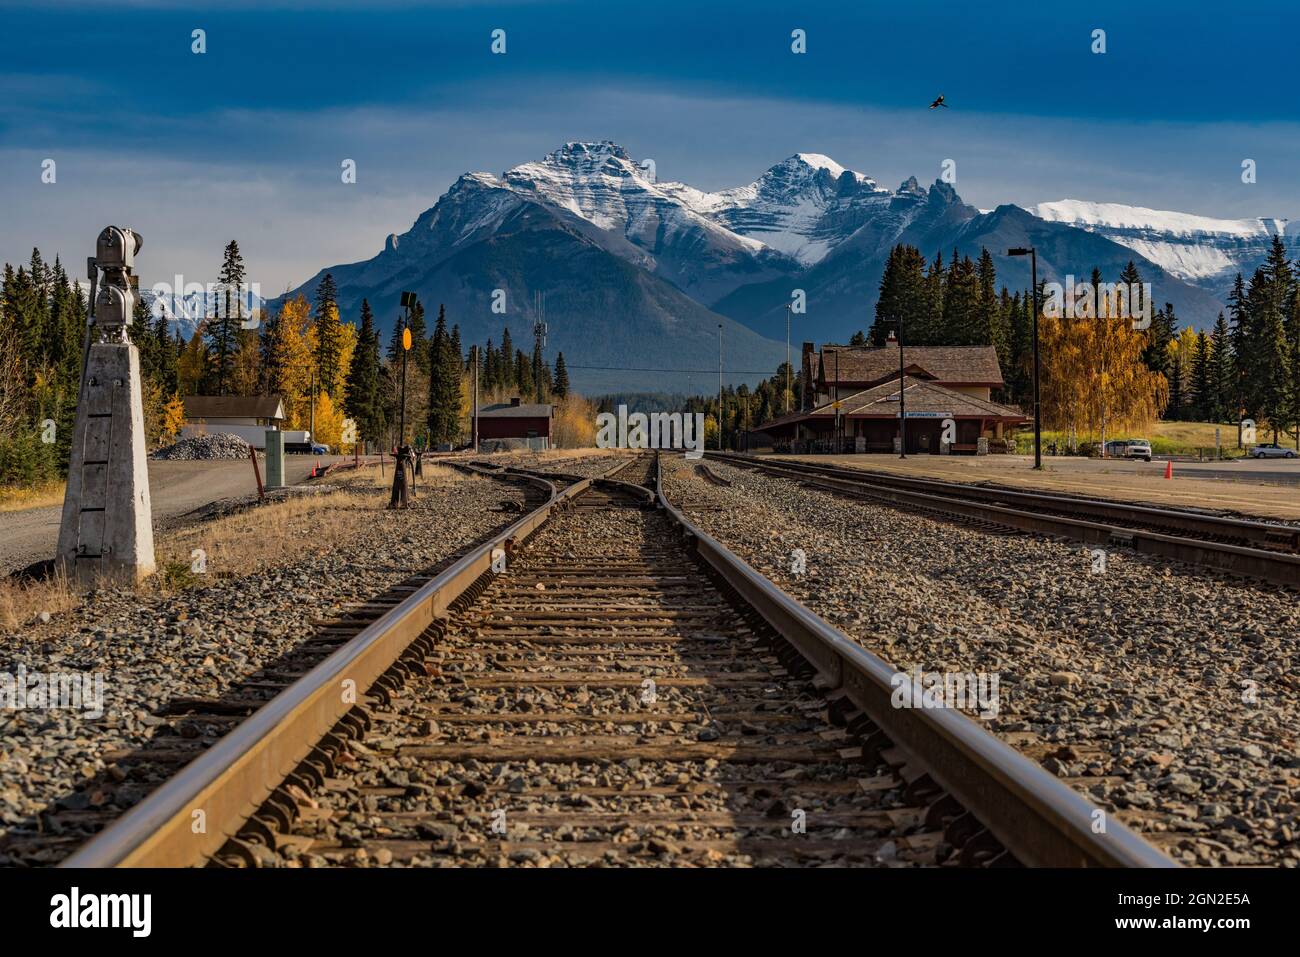 96/5000CANADA, ALBERTA, BANFF PARK. RAILWAY STATION RAILS WITH VIEW OF A MOUNTAIN RANGE Stock Photo